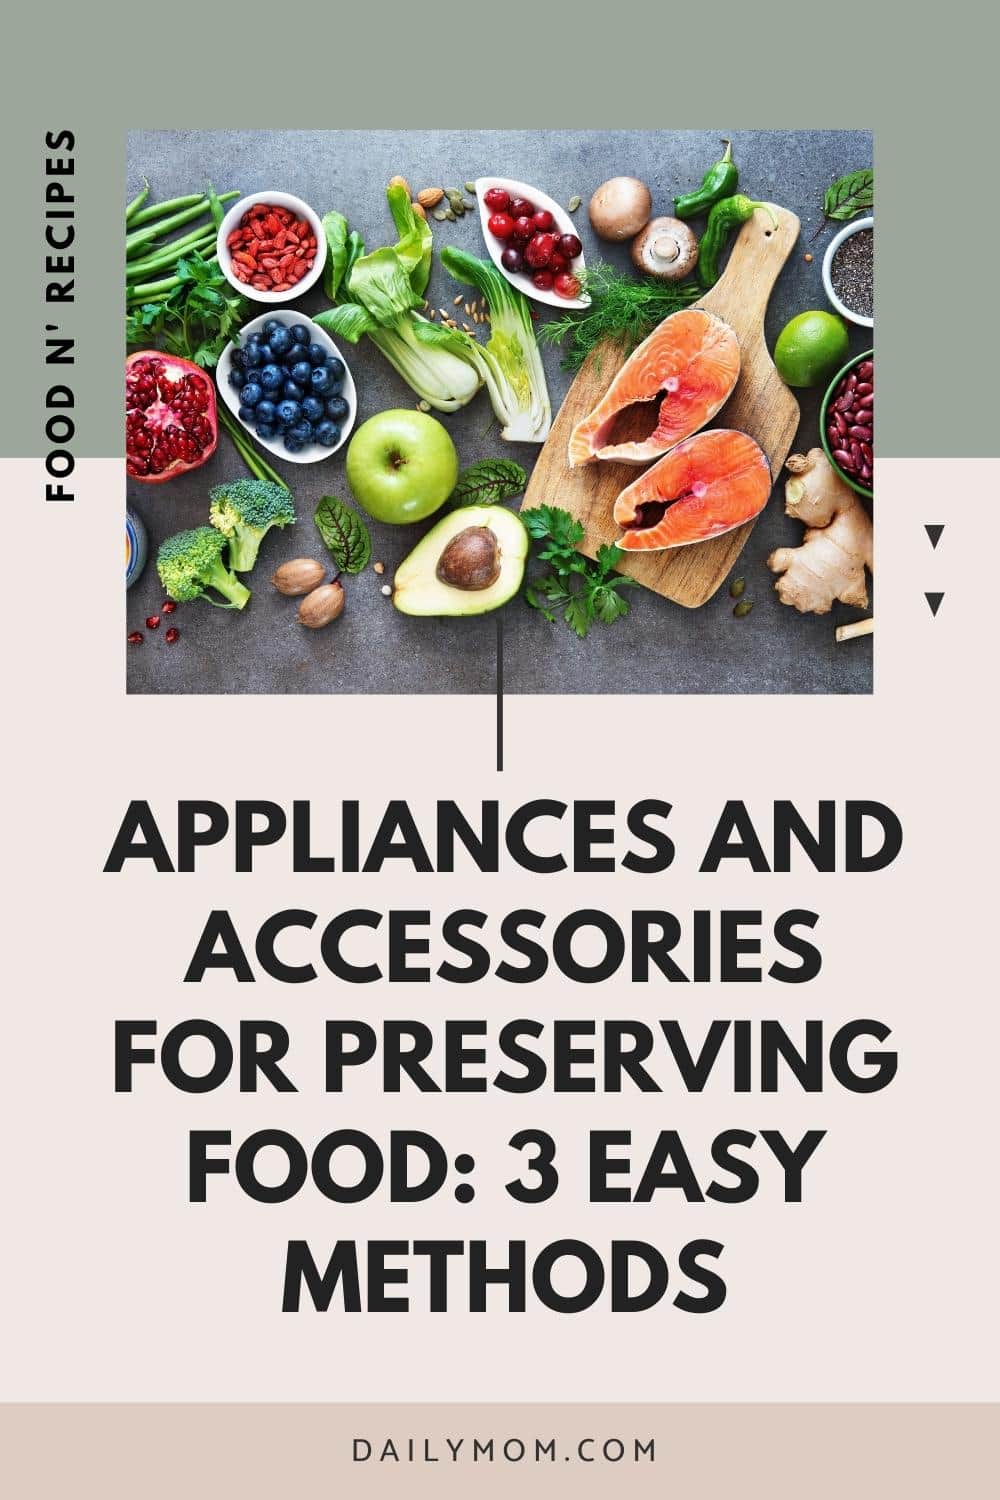 3 Home Food Preservation Tips: Naturally Preserving Food At Home Without Canning  5 Daily Mom, Magazine For Families